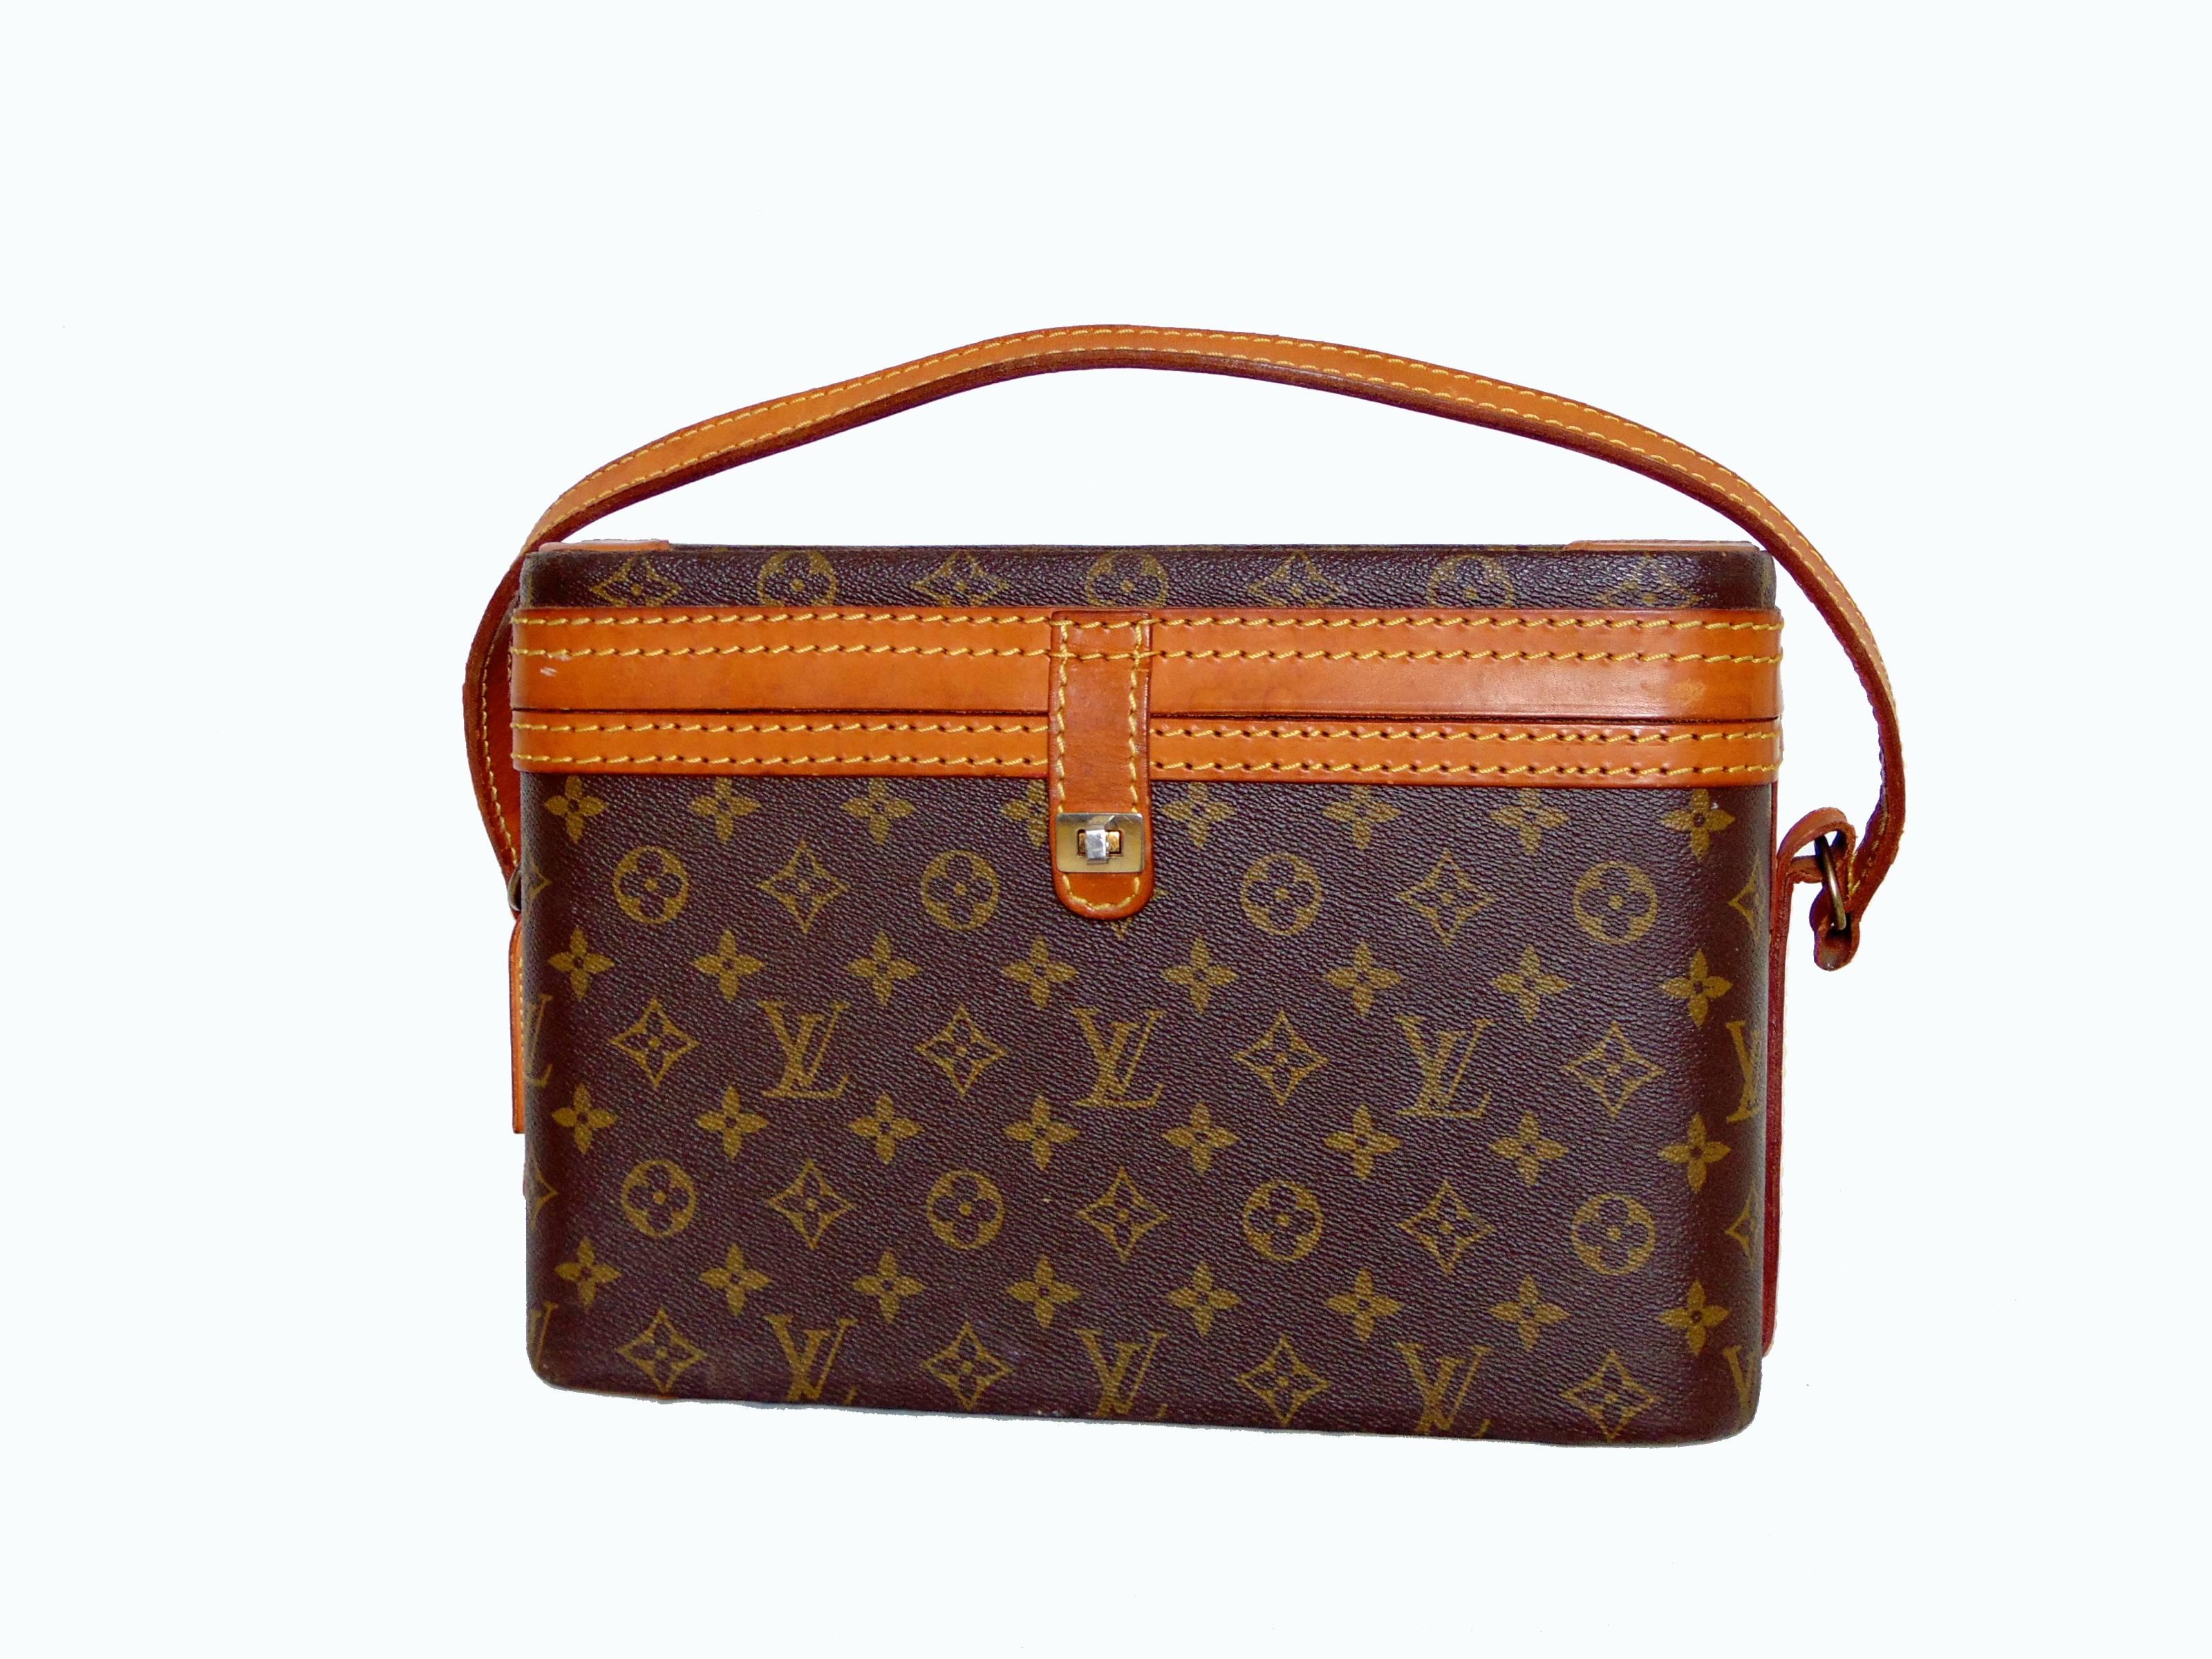 This fabulous and hard to find train case was made by Louis Vuitton in the early 1980s.  Made from their signature monogram canvas, it's trimmed in vachetta leather and fastens with a gold metal turn lock.  The interior is lined in cream fabric and